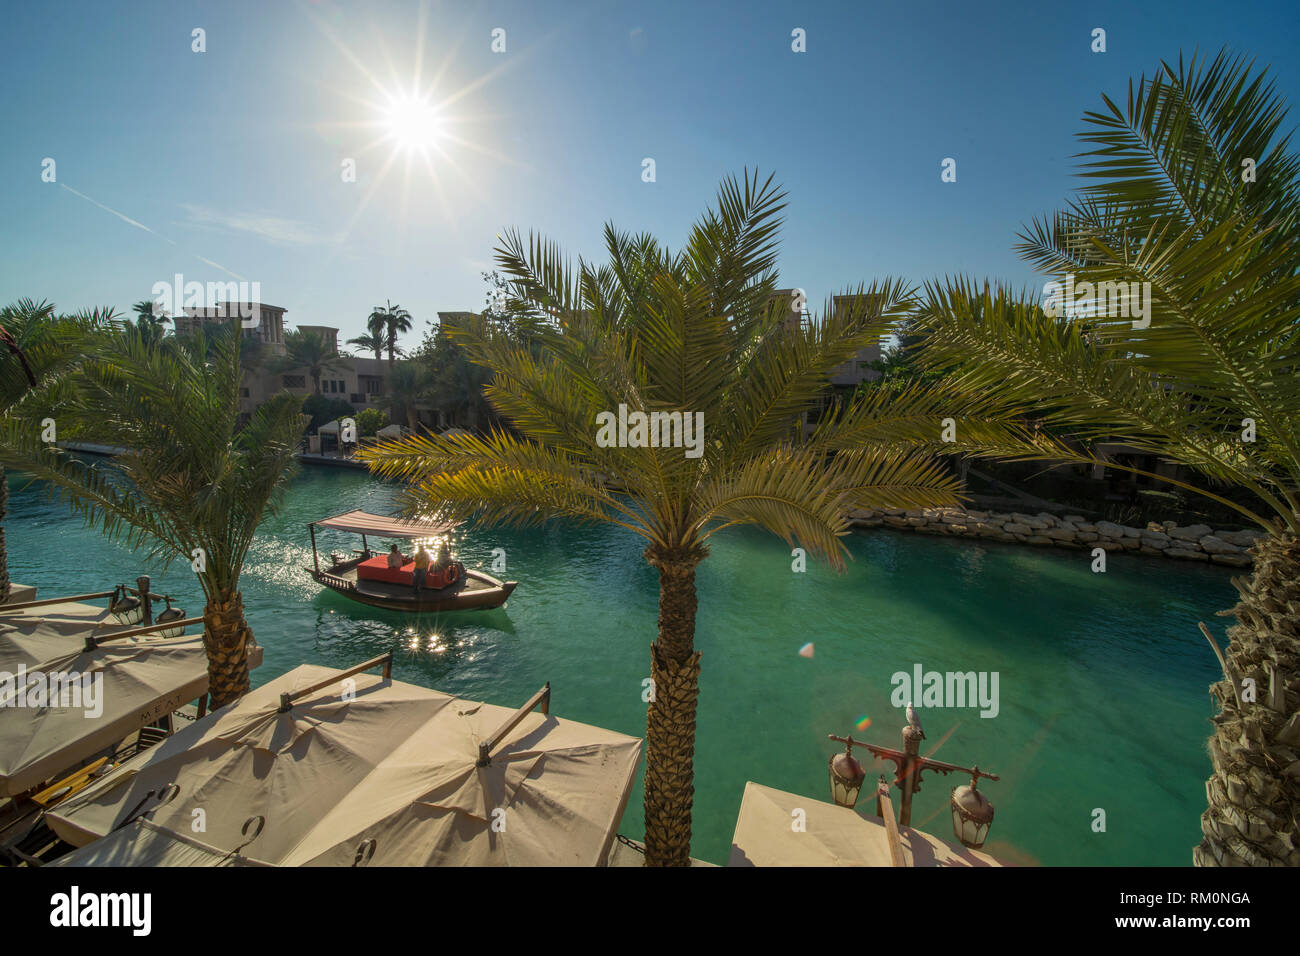 Canopied Arabian dhow makes its way down the blue waters of Souk Madinat Jumeirah and provides shade from the powerful desert sun in this lush oasis. Stock Photo